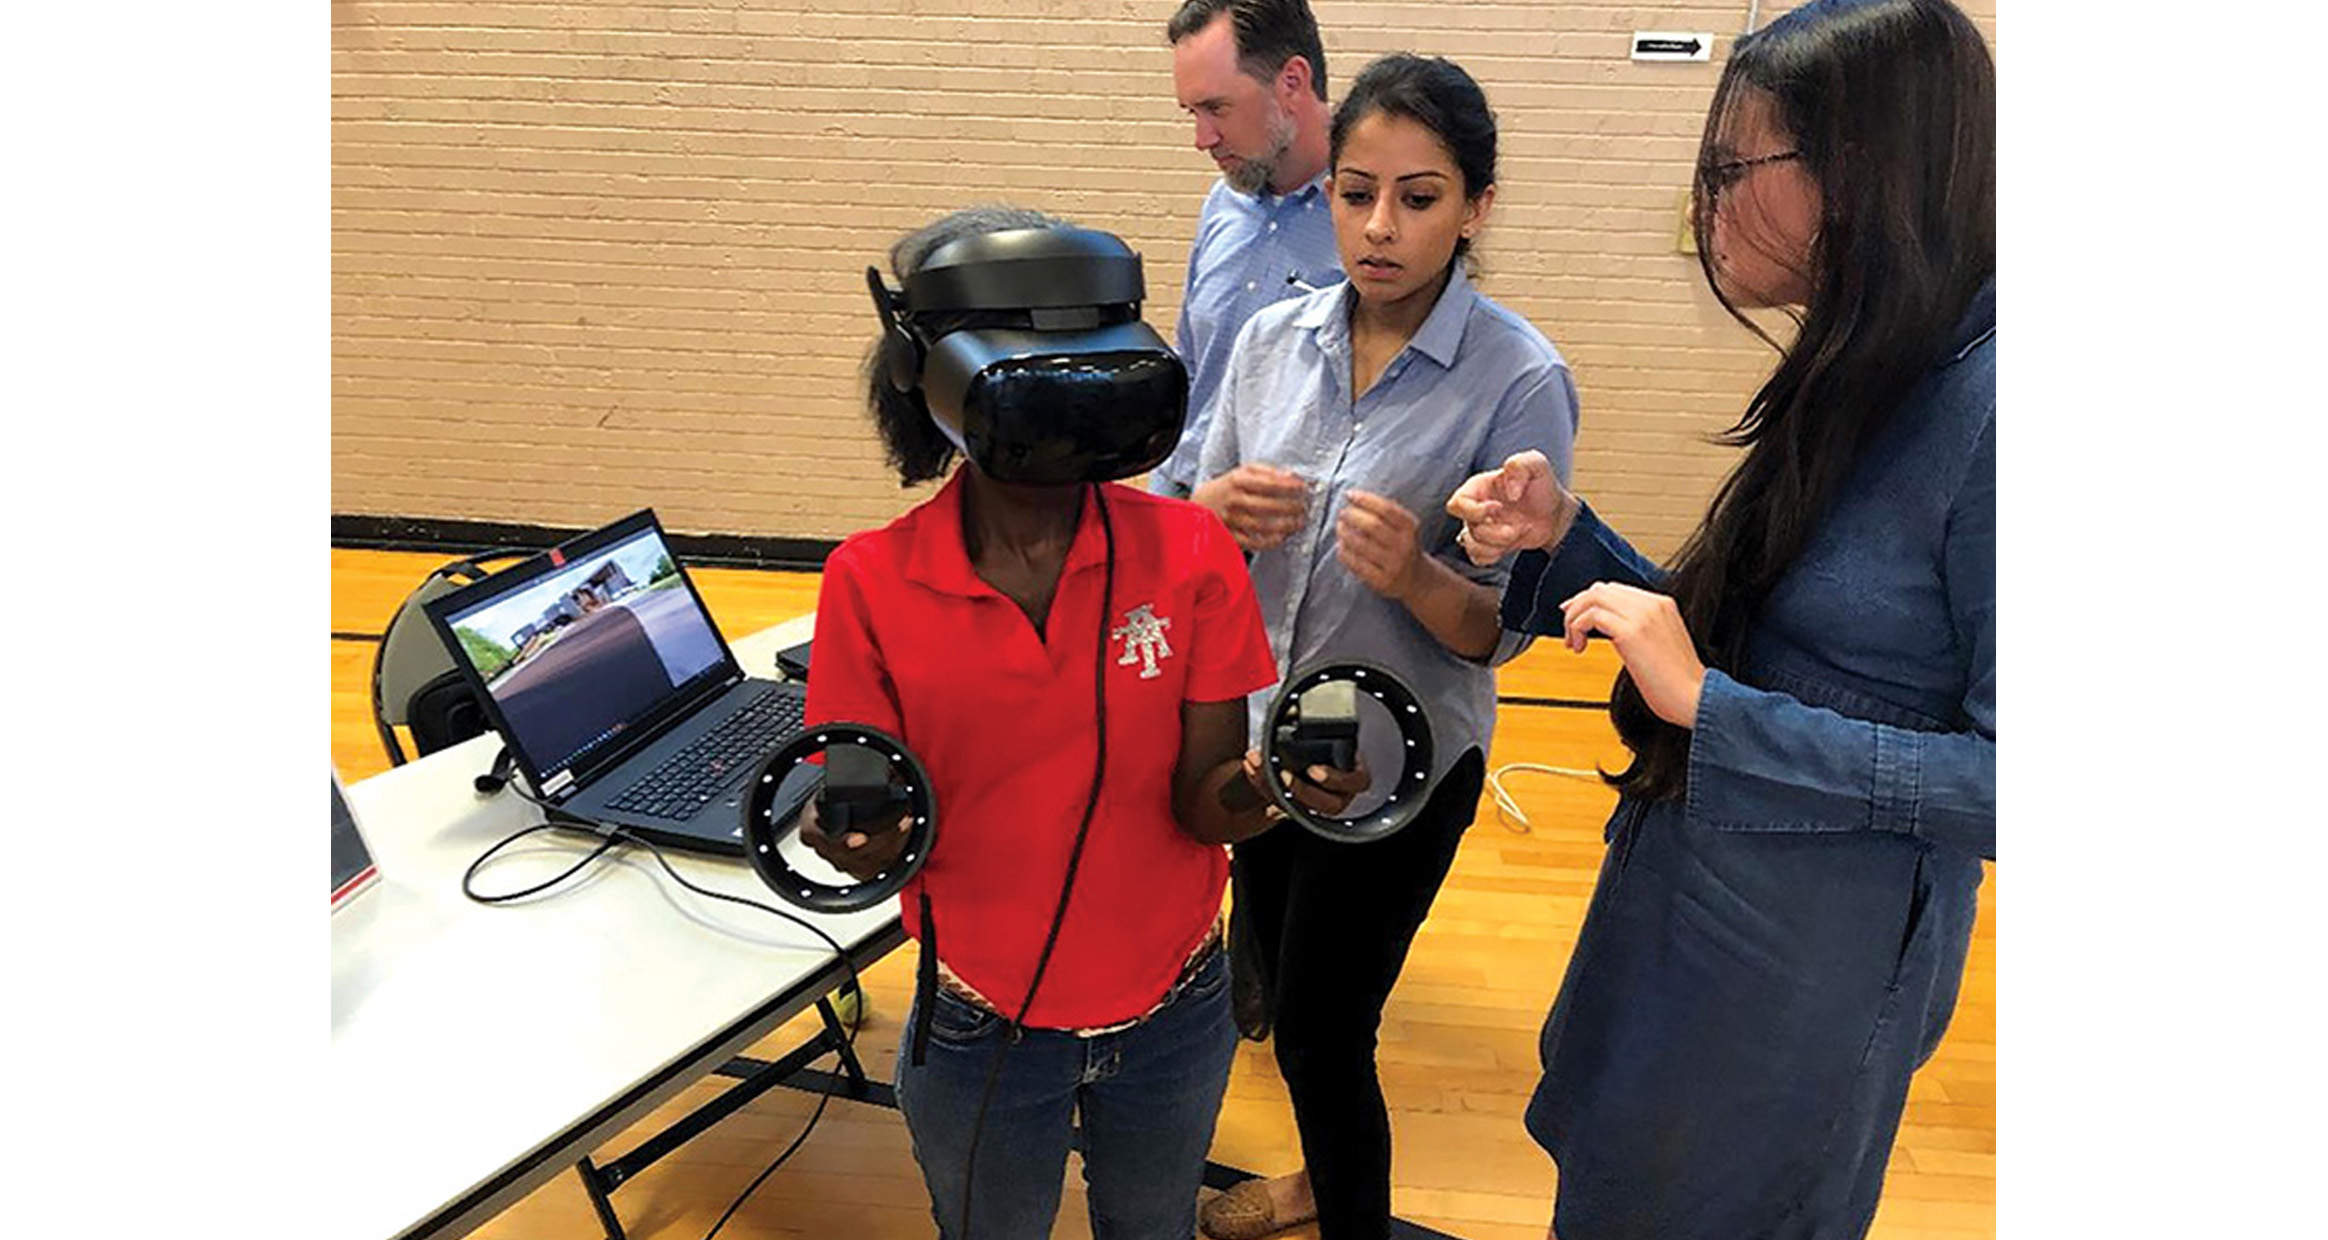 The community engages in an immersive virtual reality tour of the building